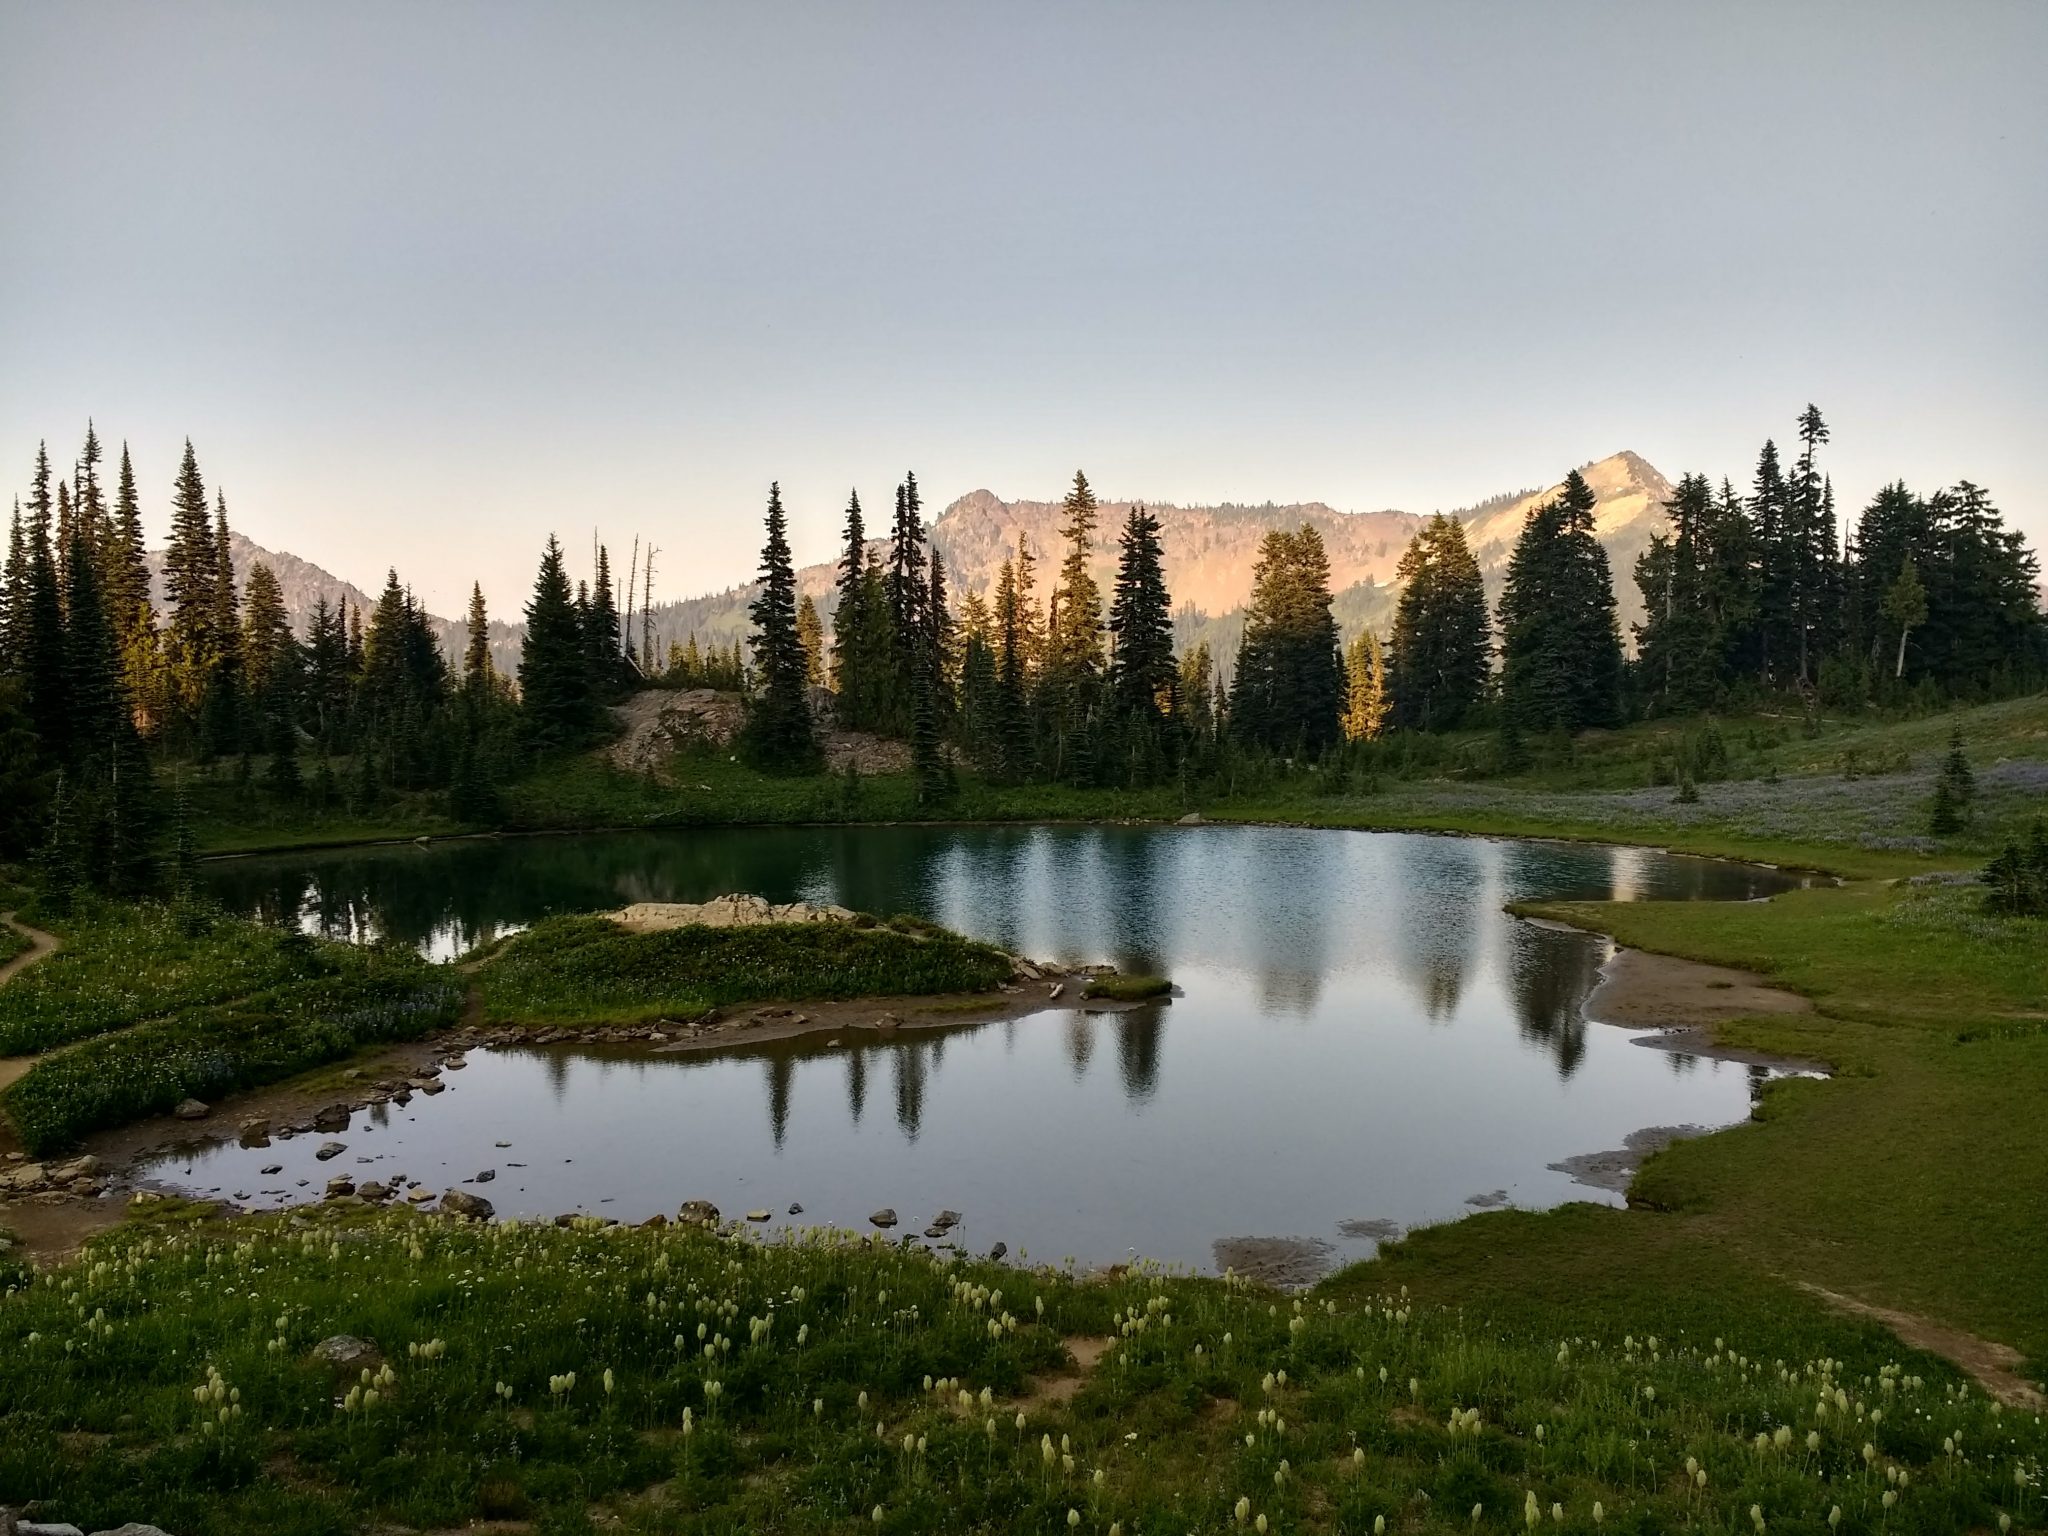 A small, shallow pond at sunset. Around the pond is a green meadow with wildflowers, mostly white ones. There are evergreen trees behind the pond and in the distance steeper mountains